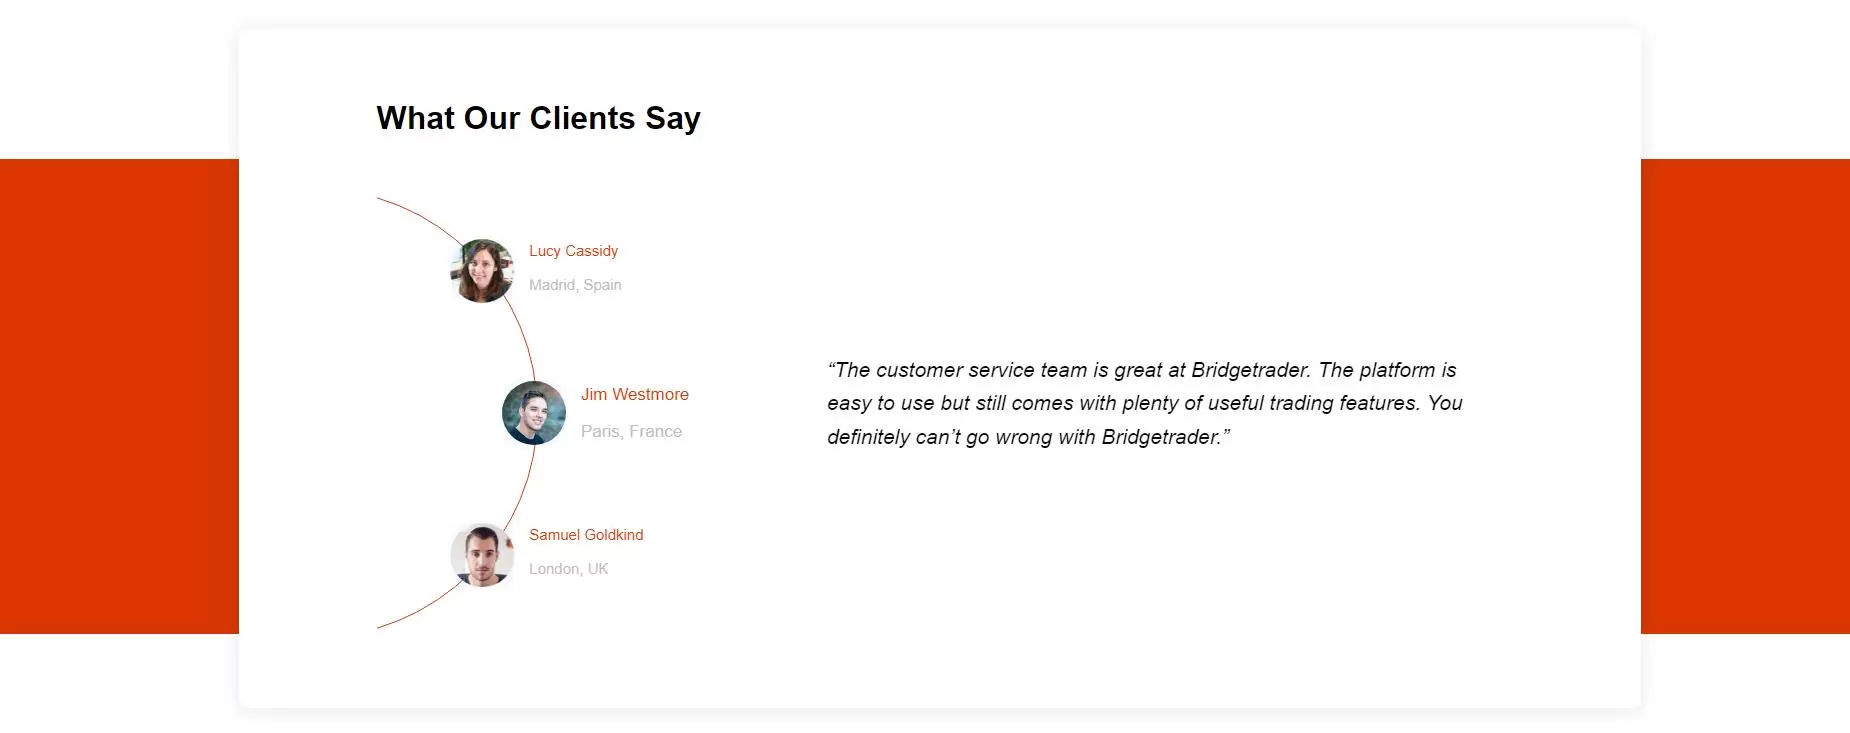 What customers say about Bridgetrader